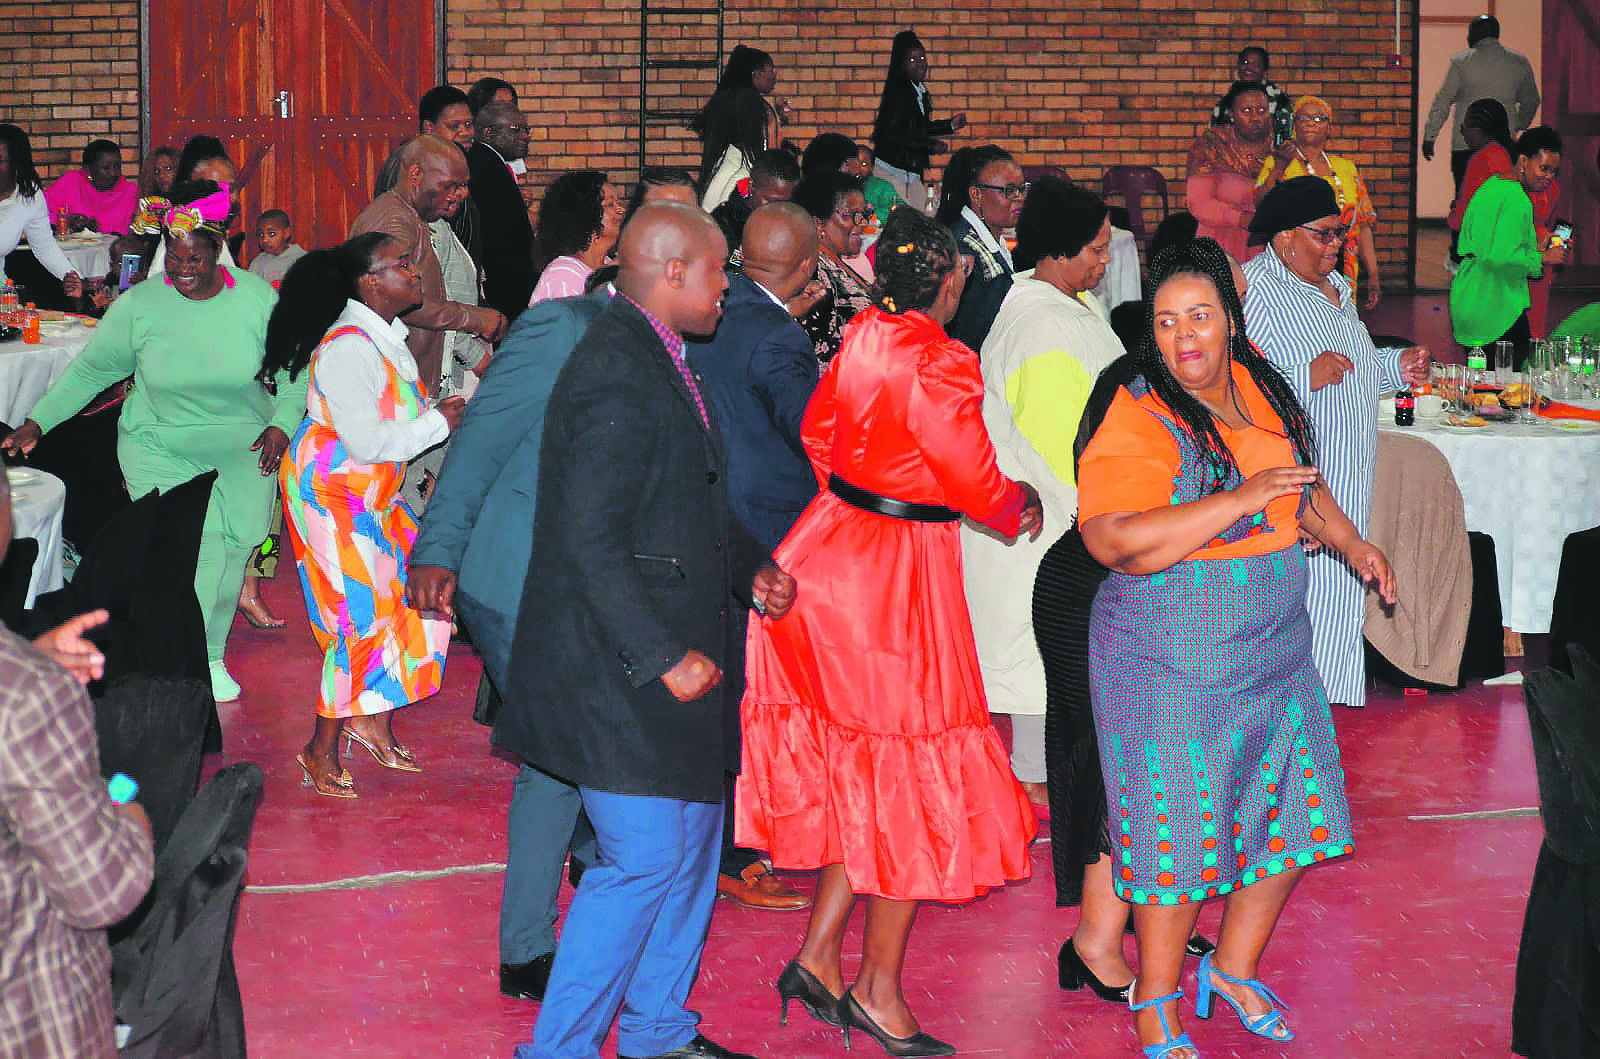 Joy was the order of the day when couples attended the Rekindle of Love event in Gugulethu at the weekend. Inset: Marriage counsellor Ntombentsha Bambiso said parents must also set time aside for kids despite their always-busy schedules.                       Photo by Lulekwa Mbadamane